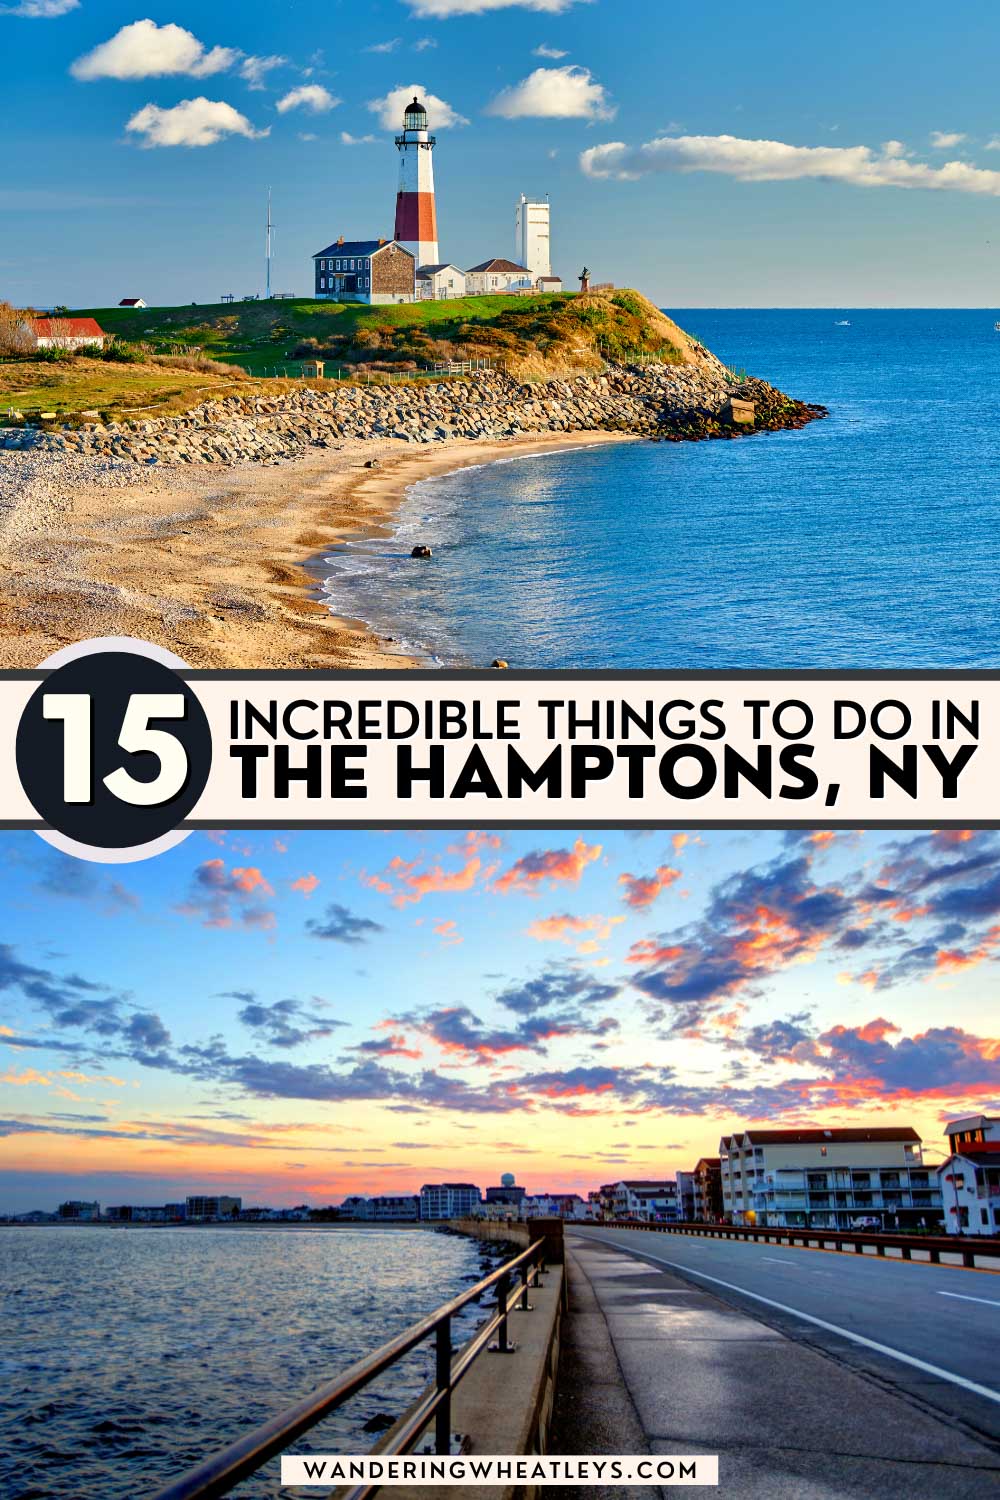 The Best Things to do in The Hamptons